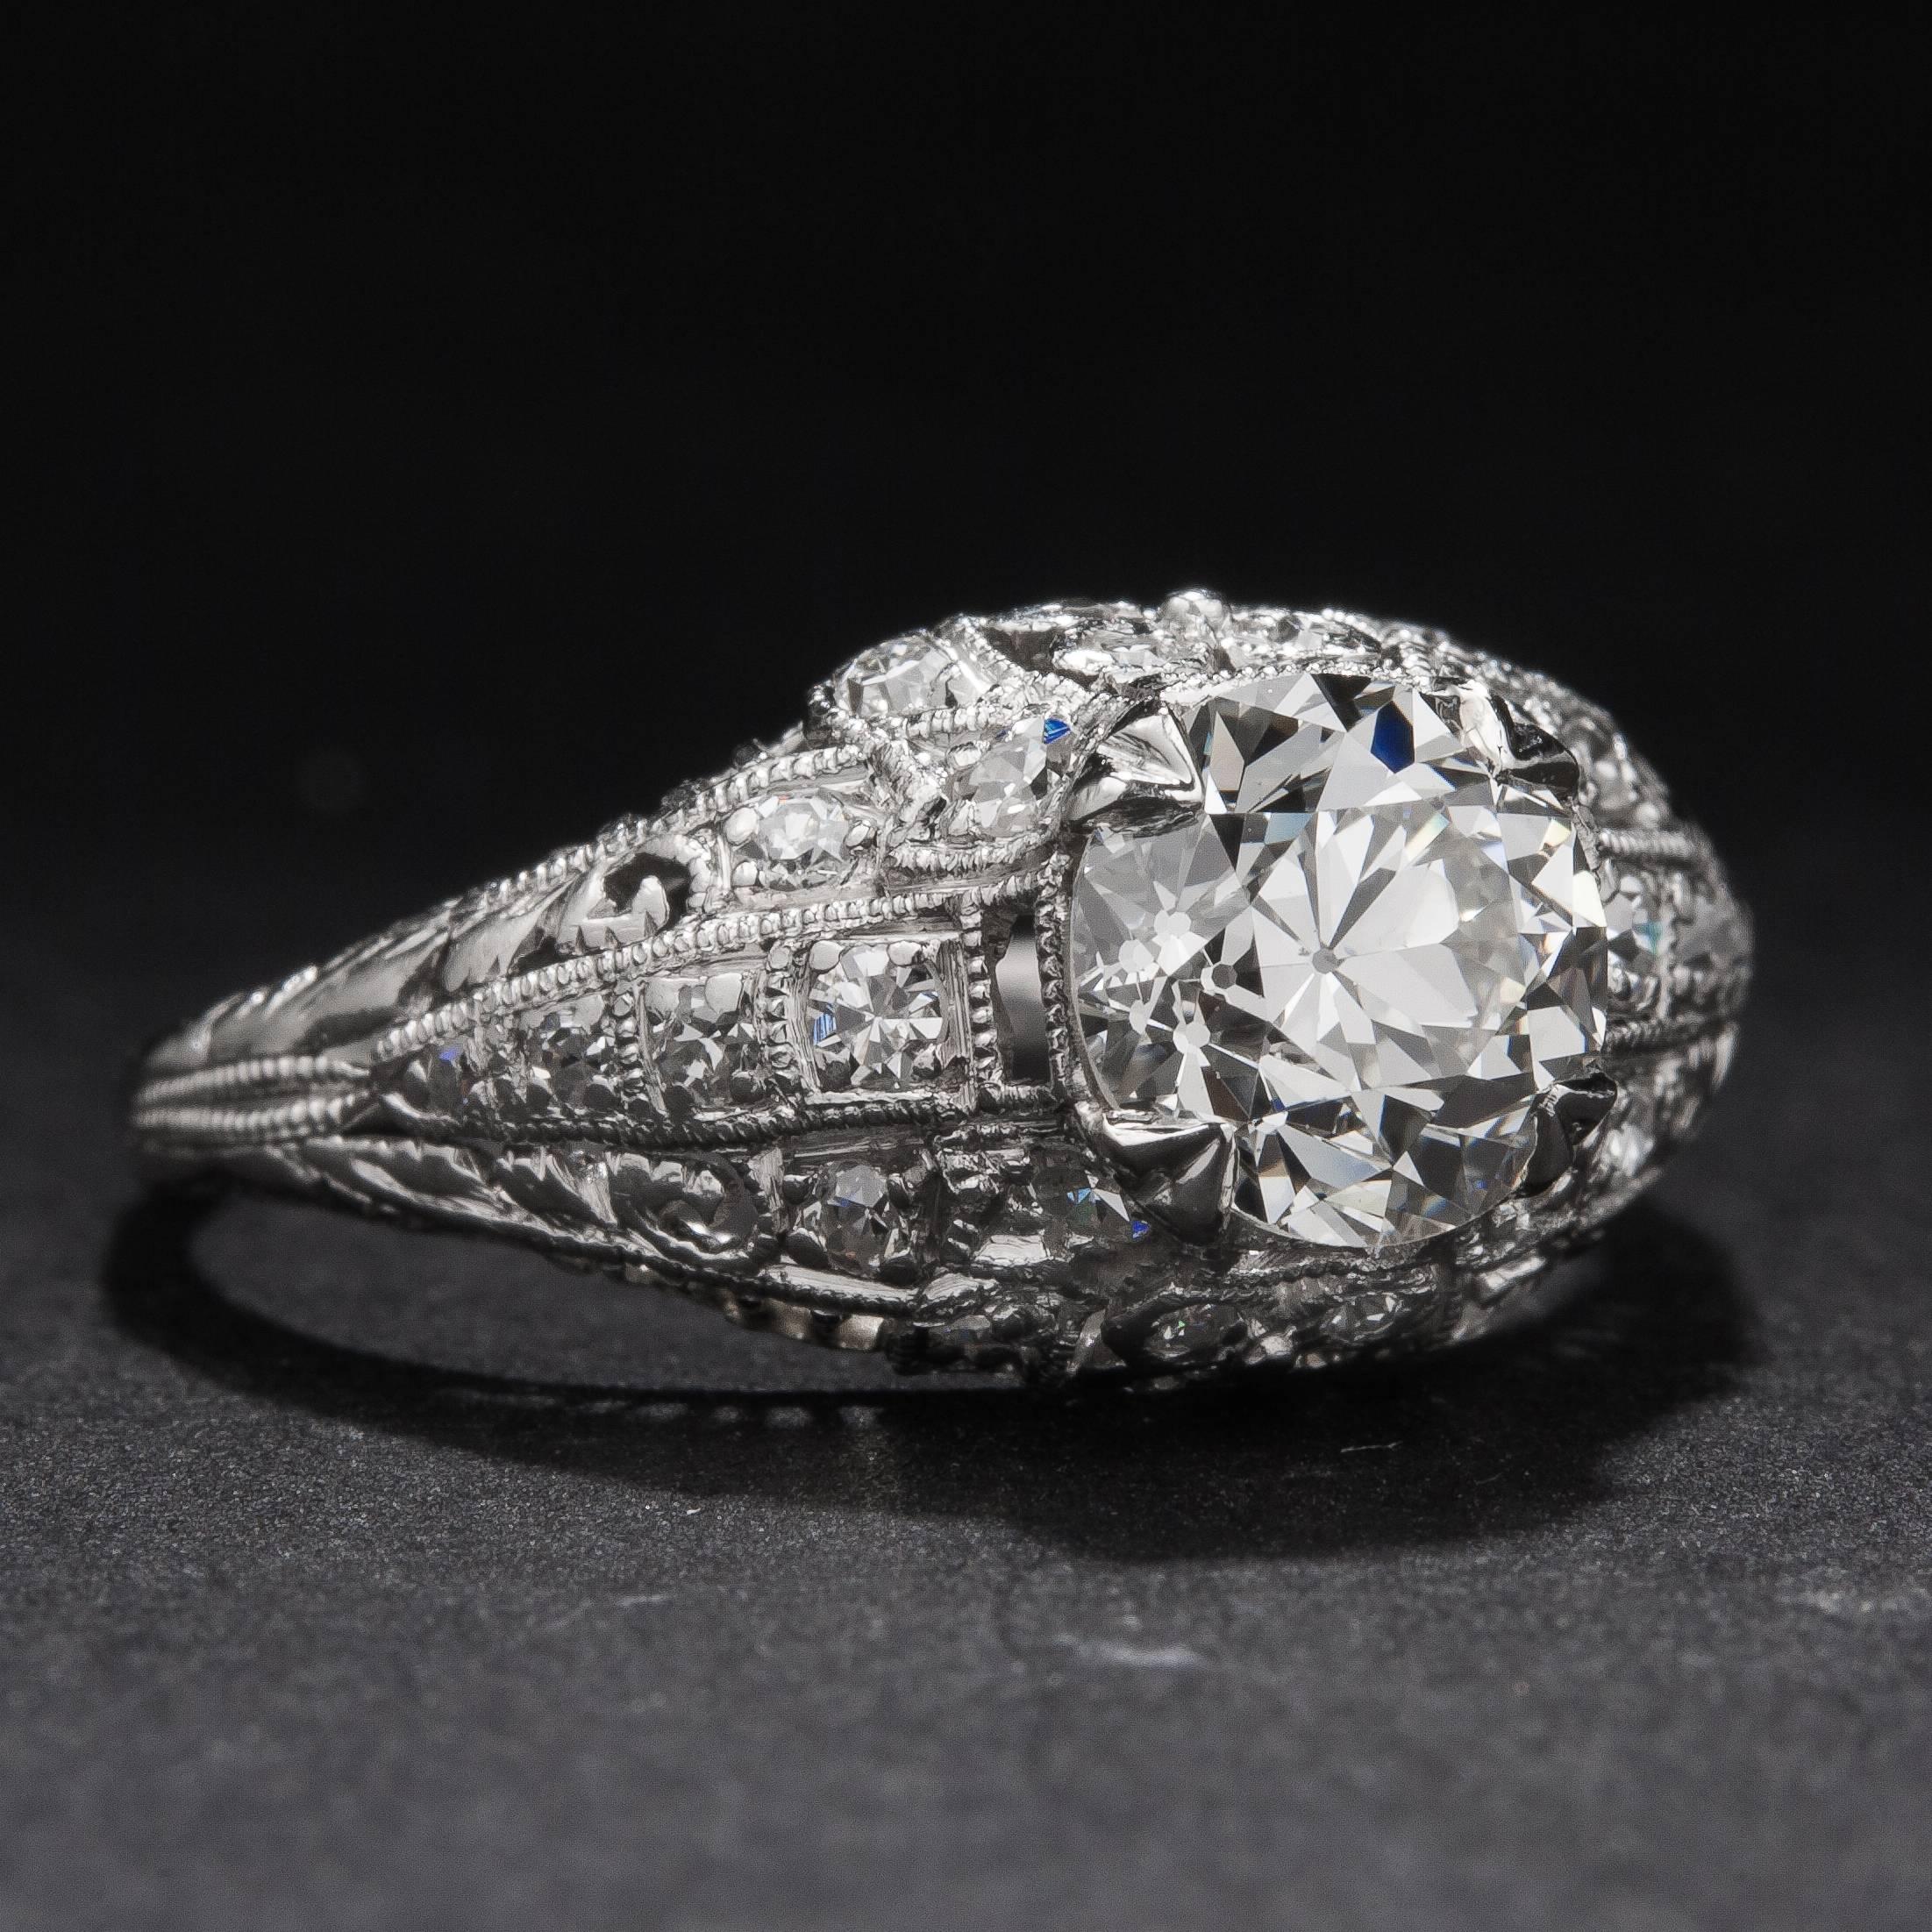 1.02ct Diamond Art Deco Ring In Excellent Condition For Sale In Carmel, CA